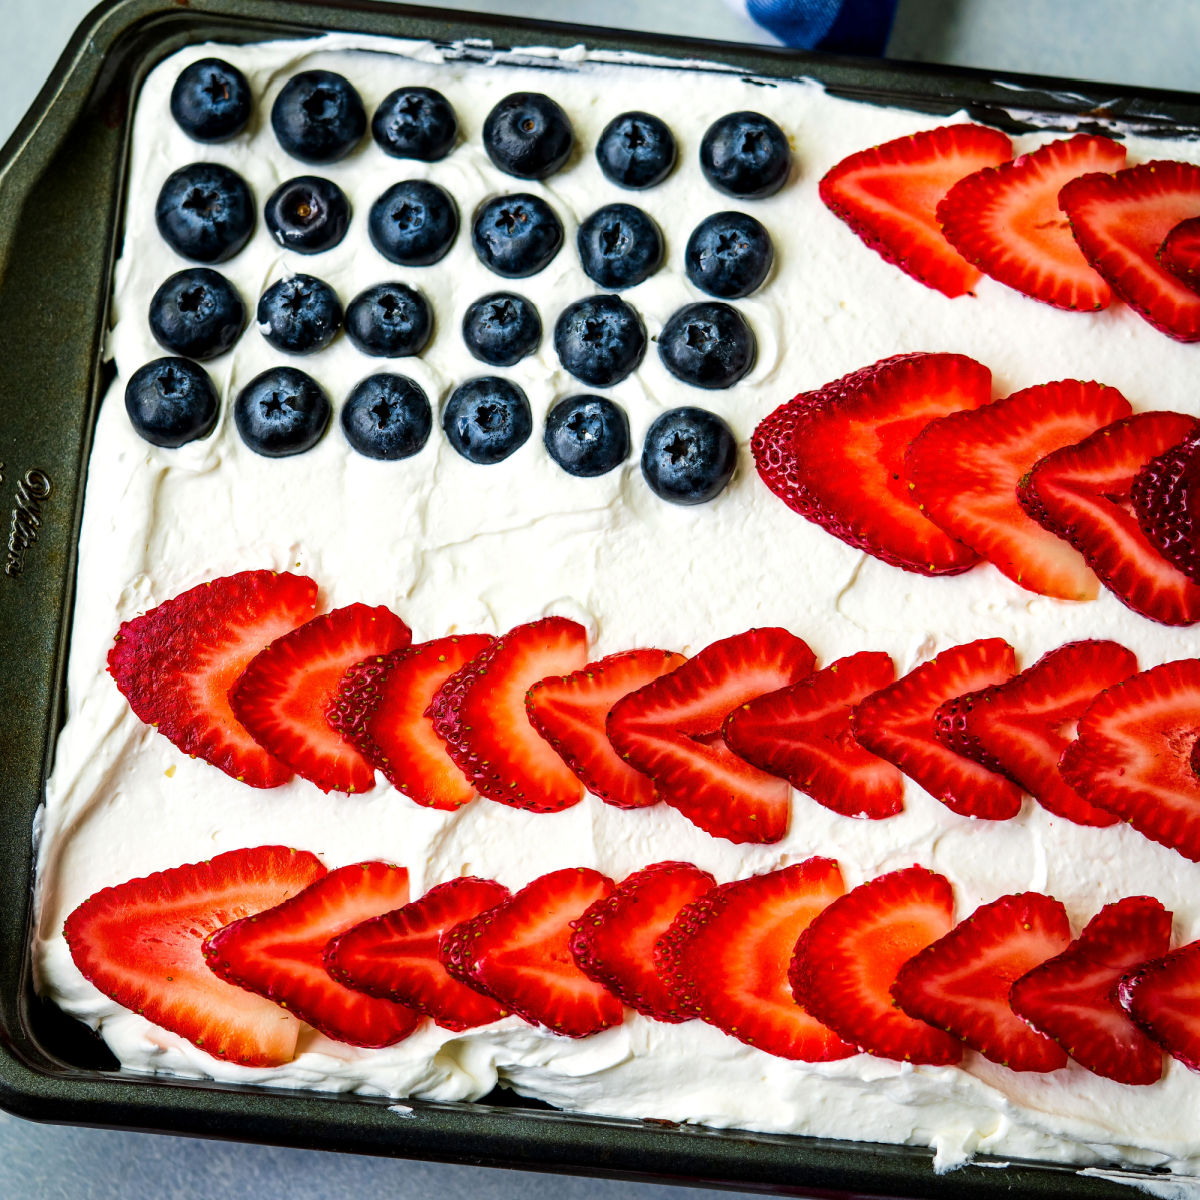 4th of July Flag Cake - Plain Chicken